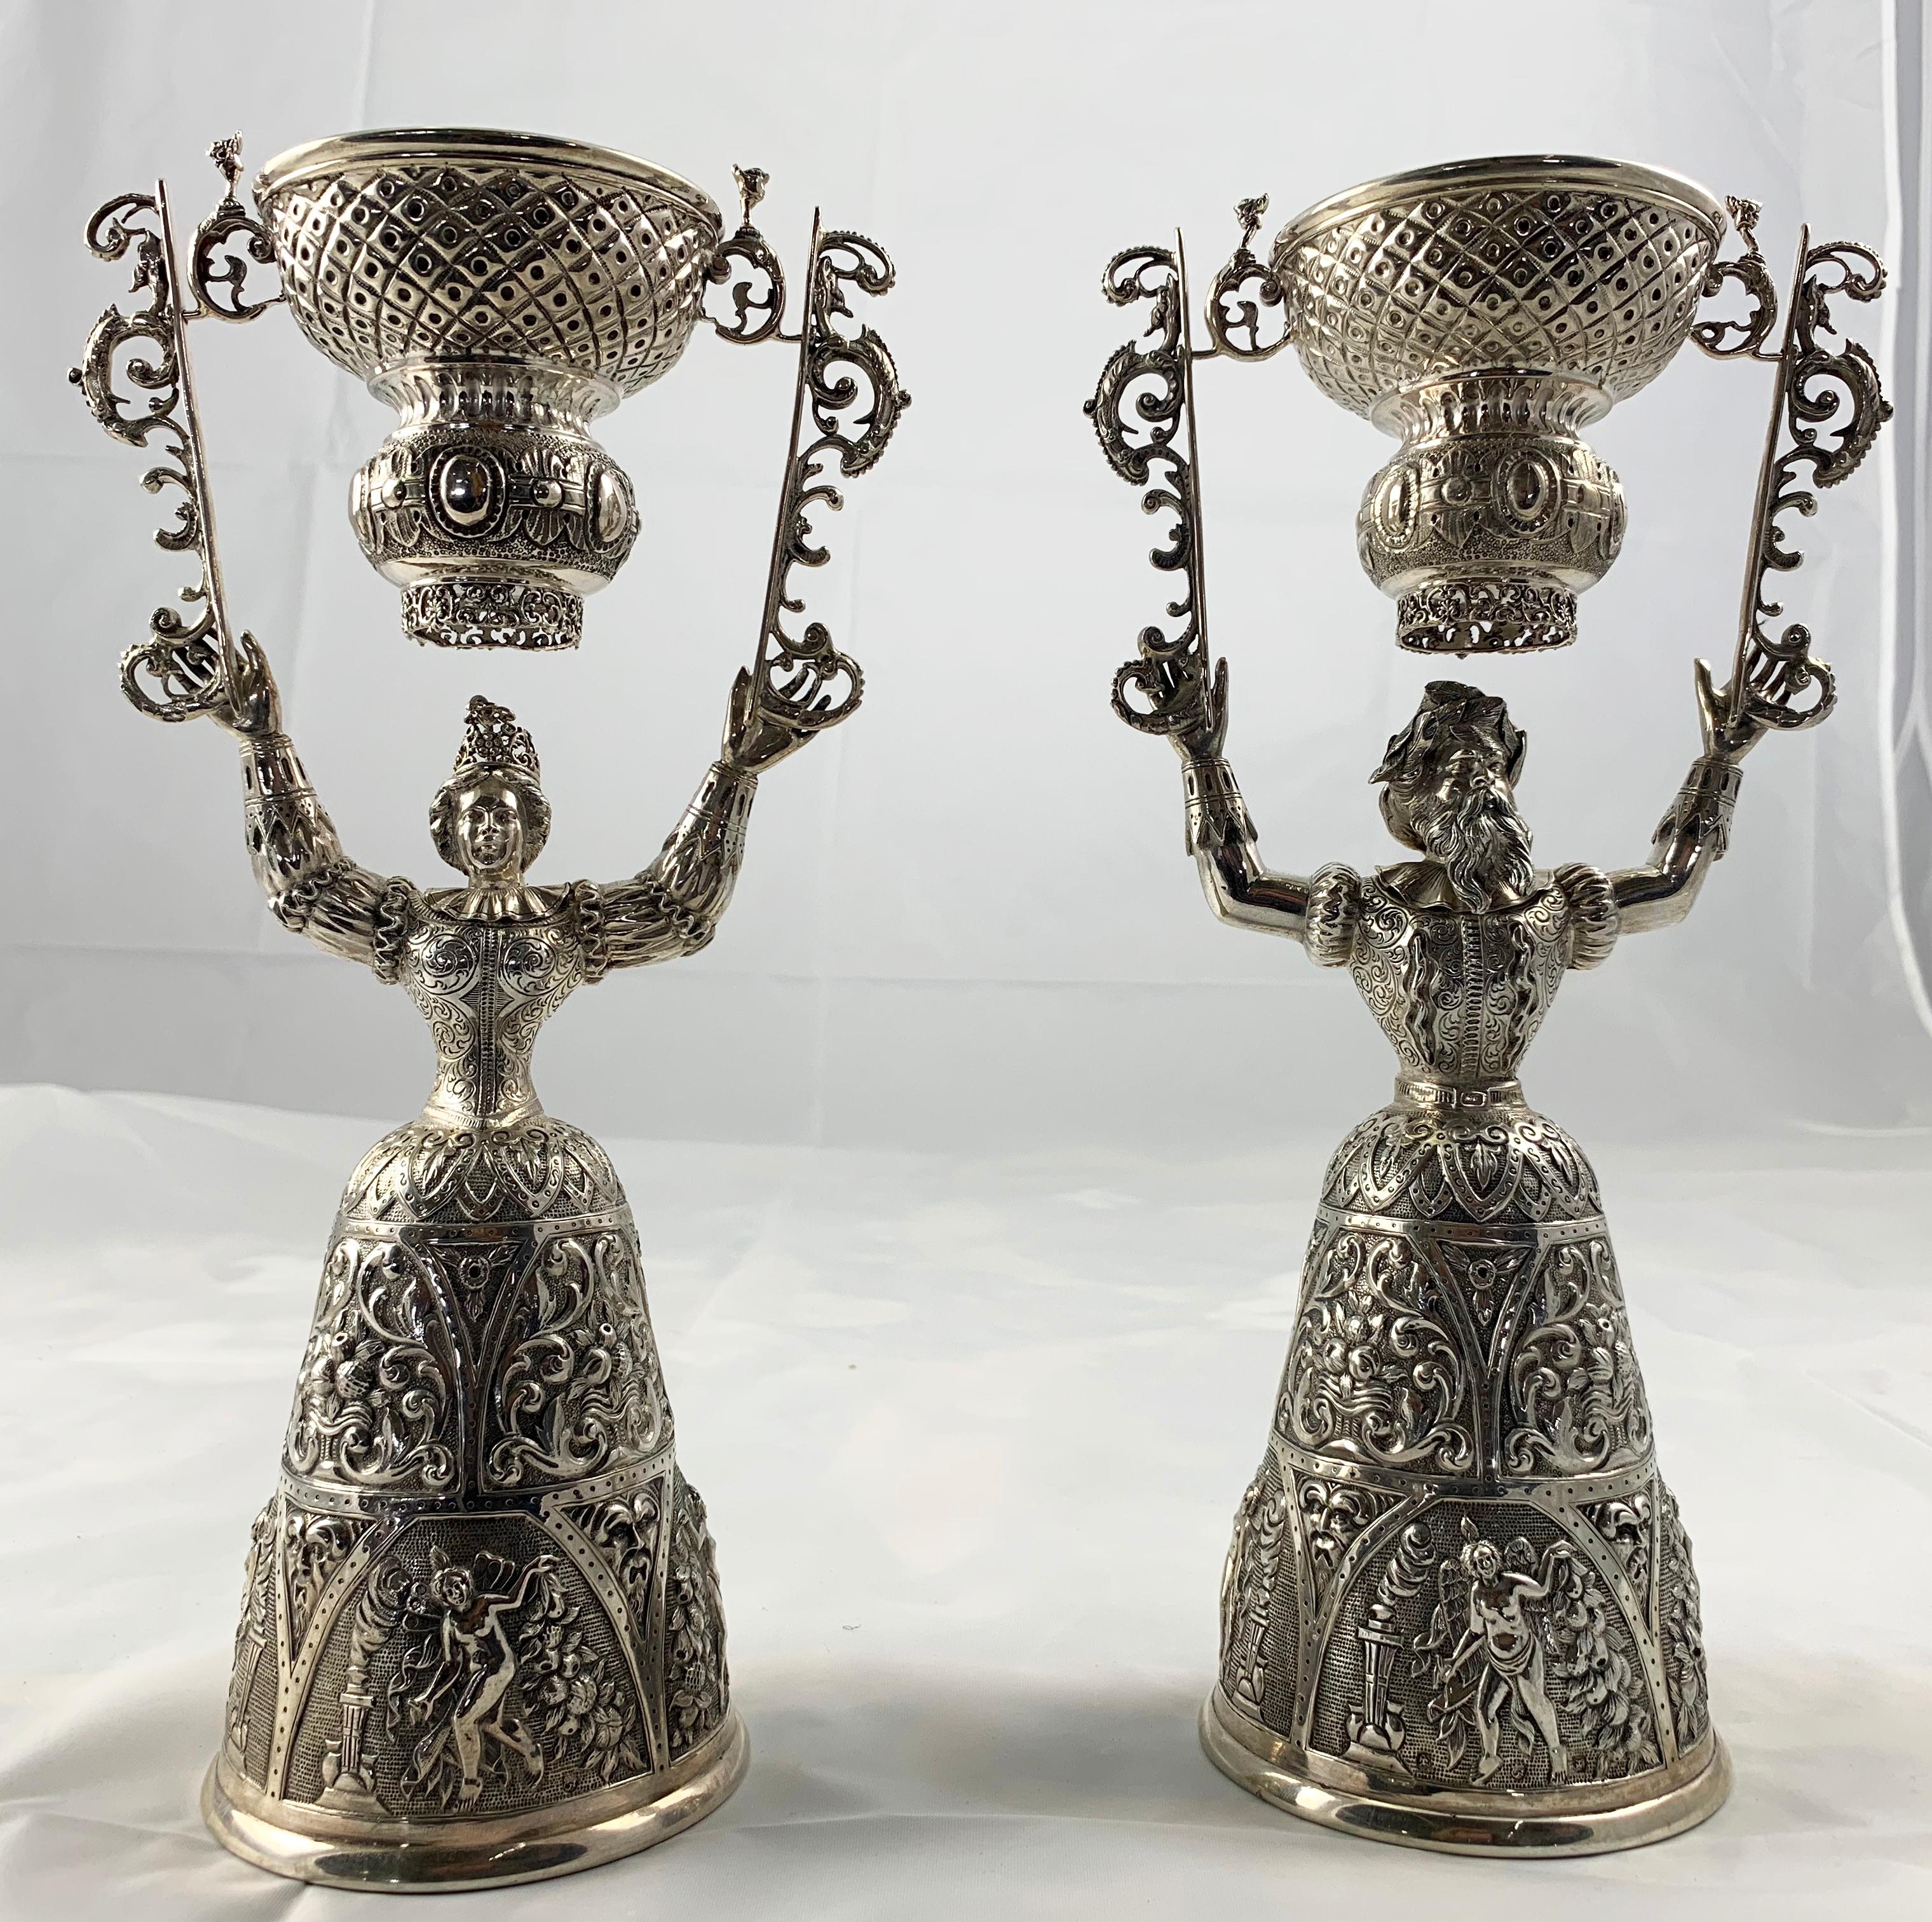 Hand-Crafted 19th Century Pair of Silver Wager Cups For Sale